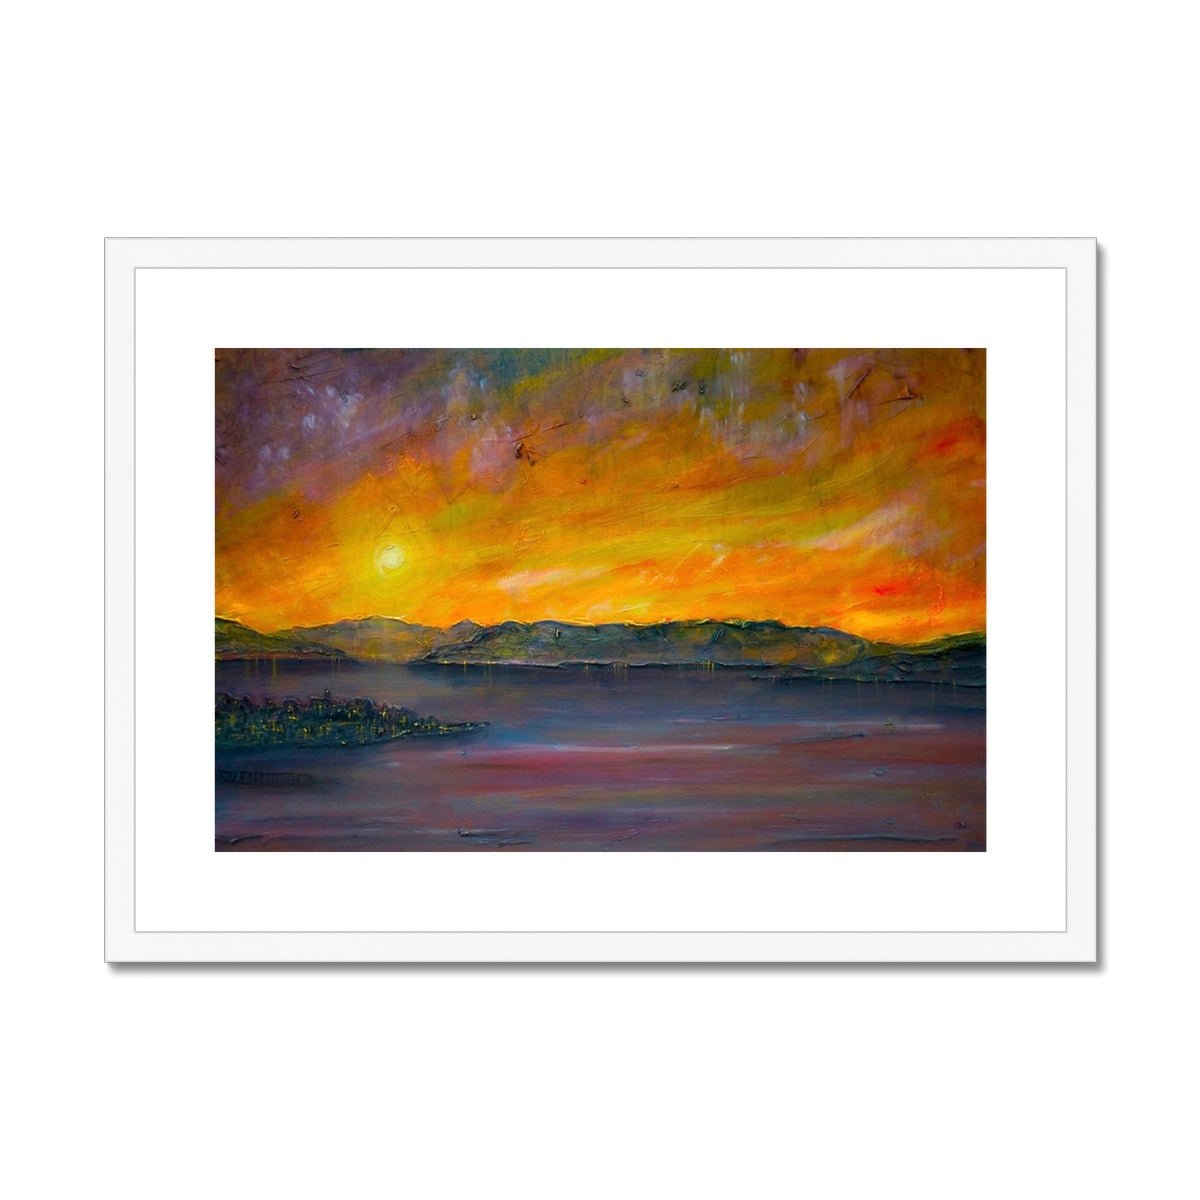 Sunset Over Gourock Painting | Framed & Mounted Prints From Scotland-Framed & Mounted Prints-River Clyde Art Gallery-A2 Landscape-White Frame-Paintings, Prints, Homeware, Art Gifts From Scotland By Scottish Artist Kevin Hunter